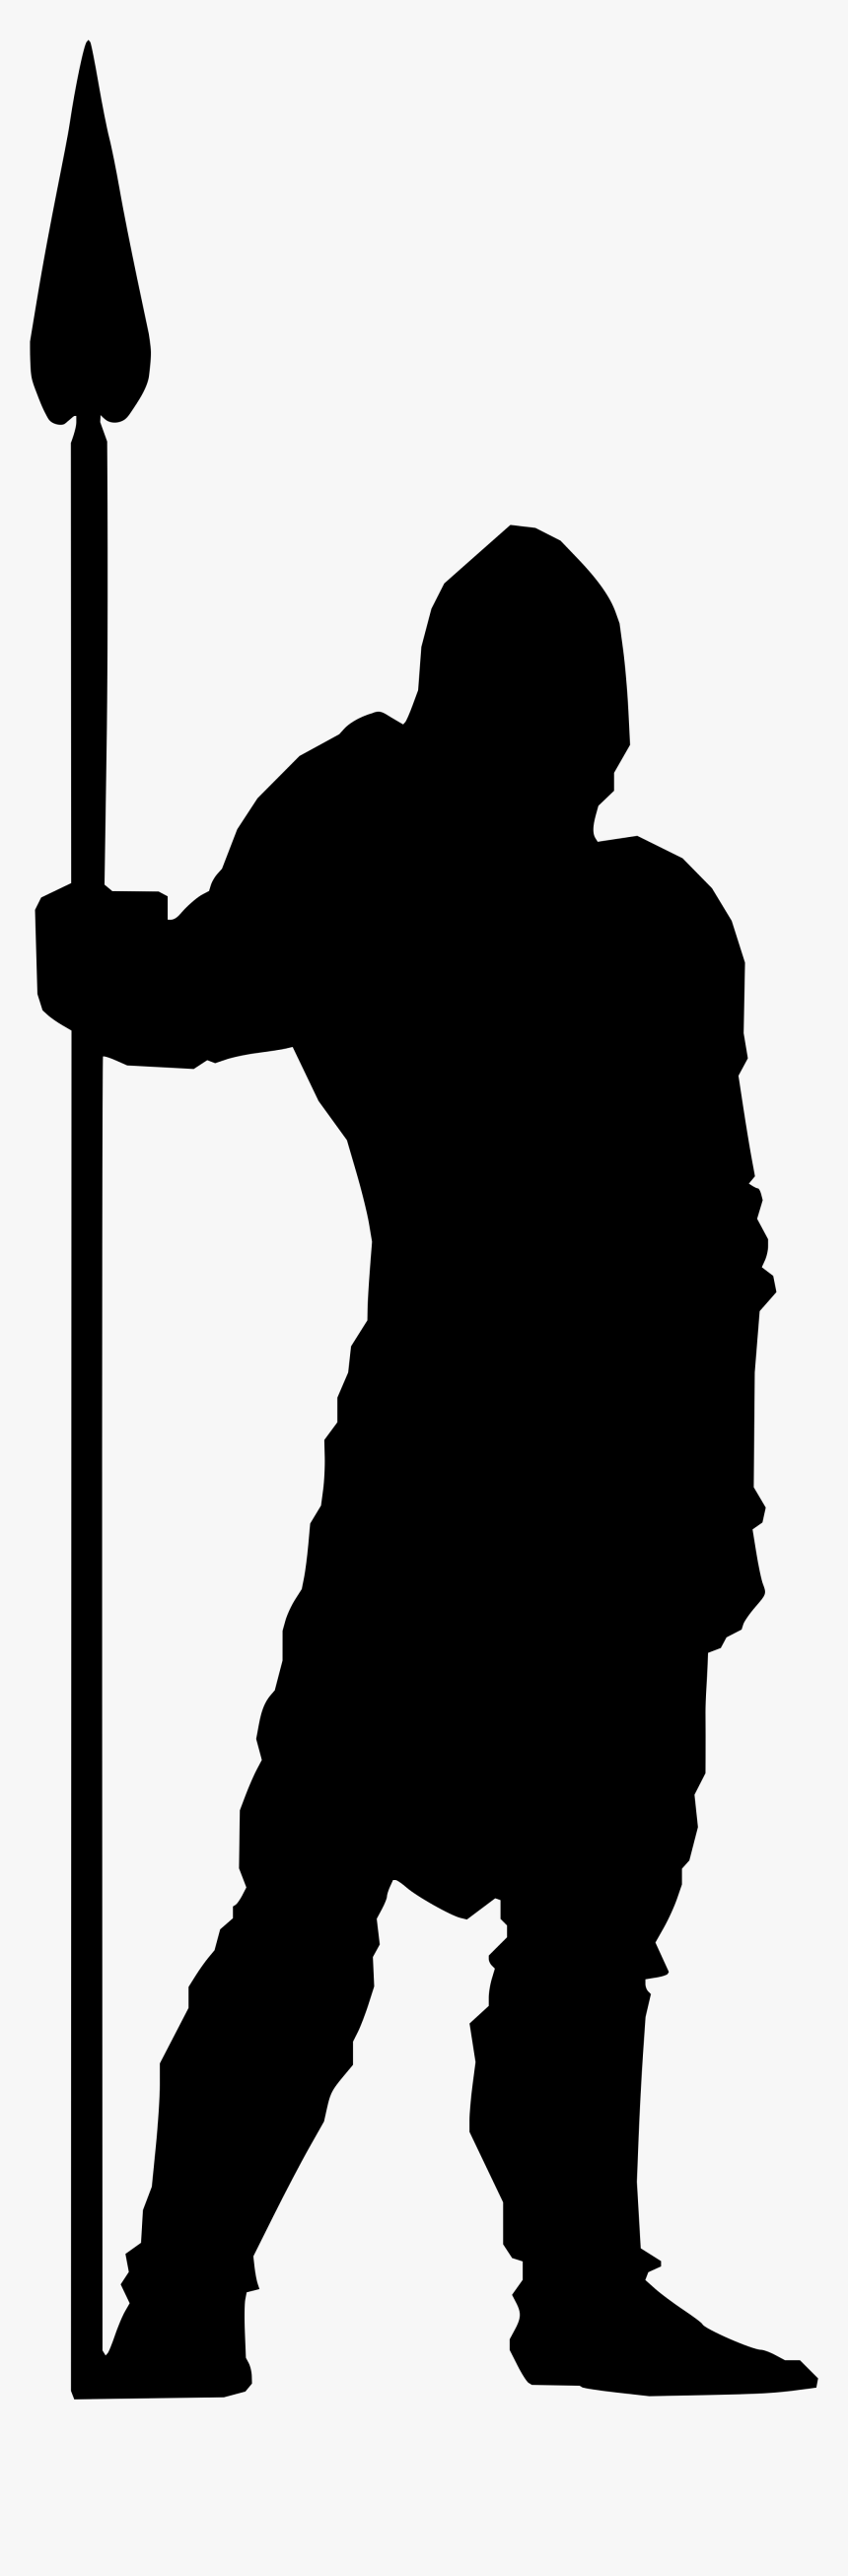 Soldier Svg Silhouette - Medieval Army Silhouette Png, Transparent Png, Free Download